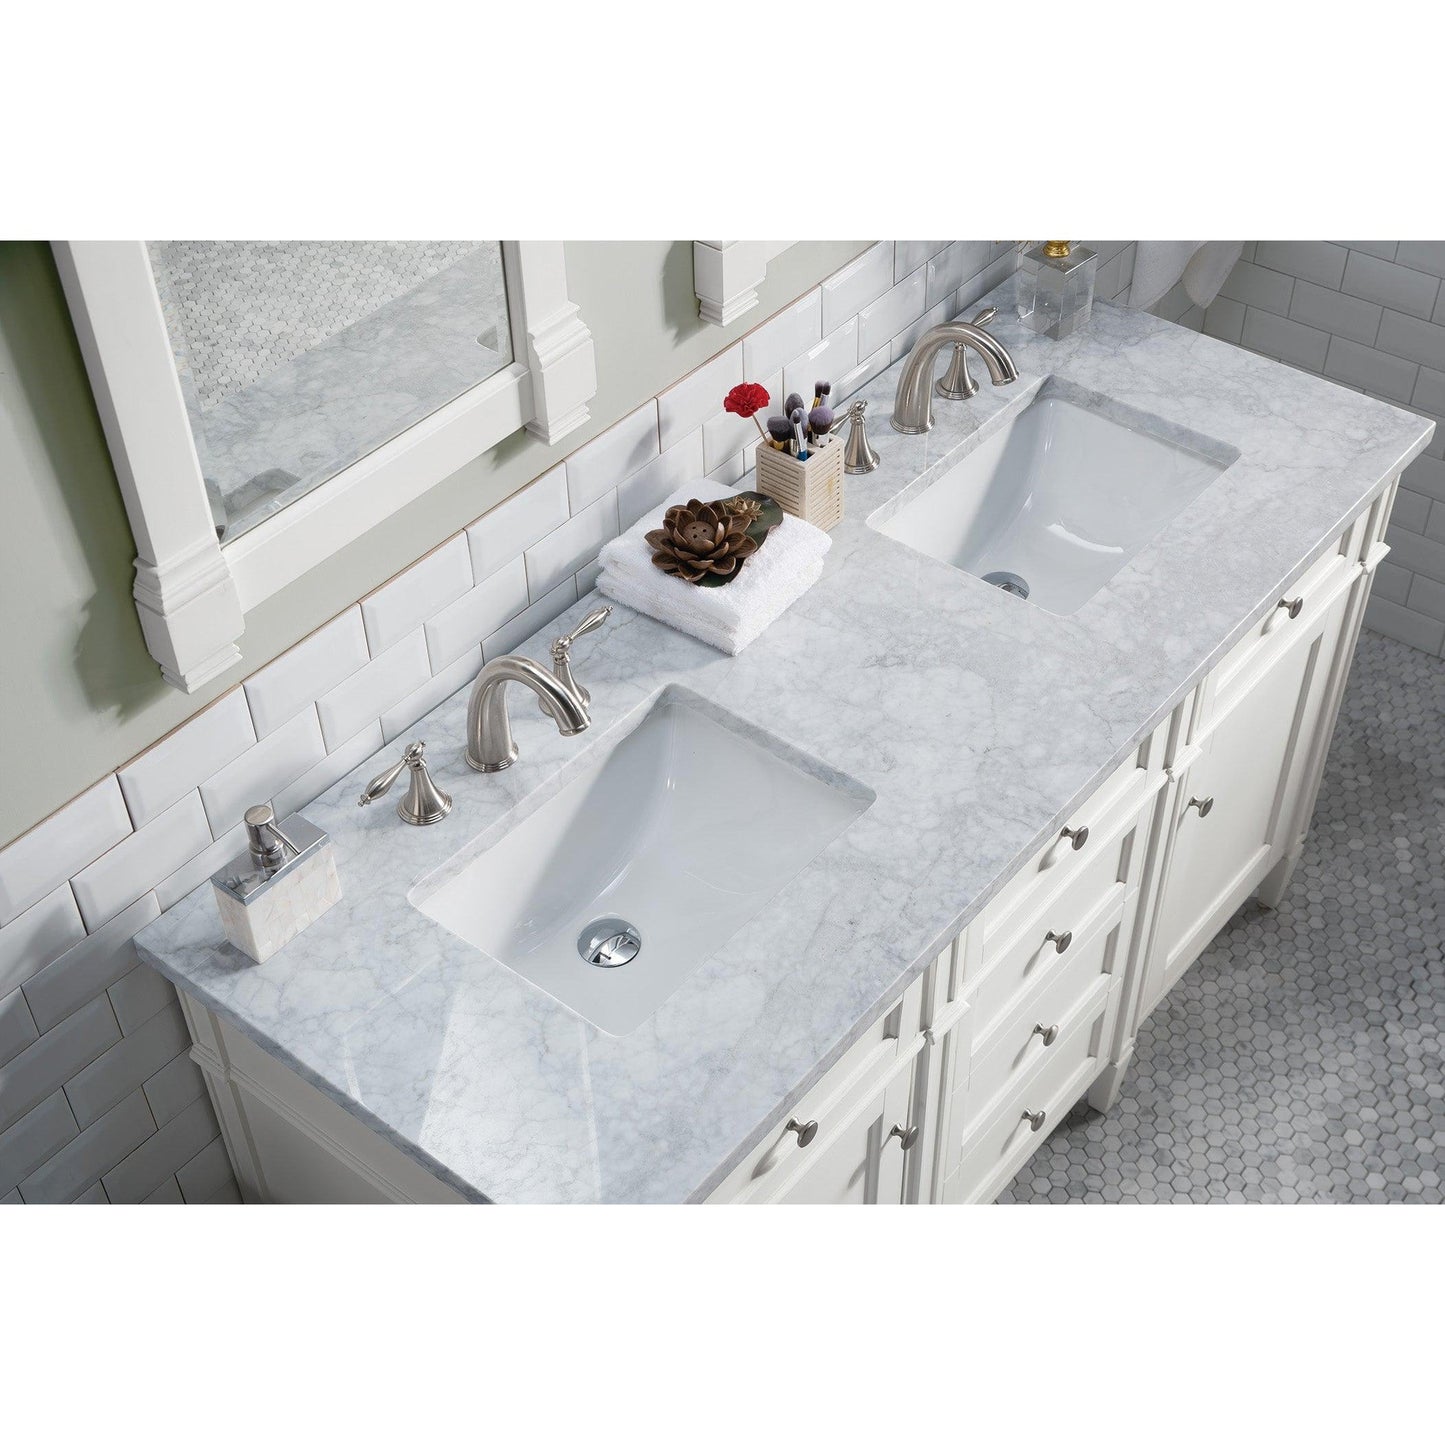 James Martin Vanities Brittany 60" Bright White Double Vanity With 3cm Carrara Marble Top